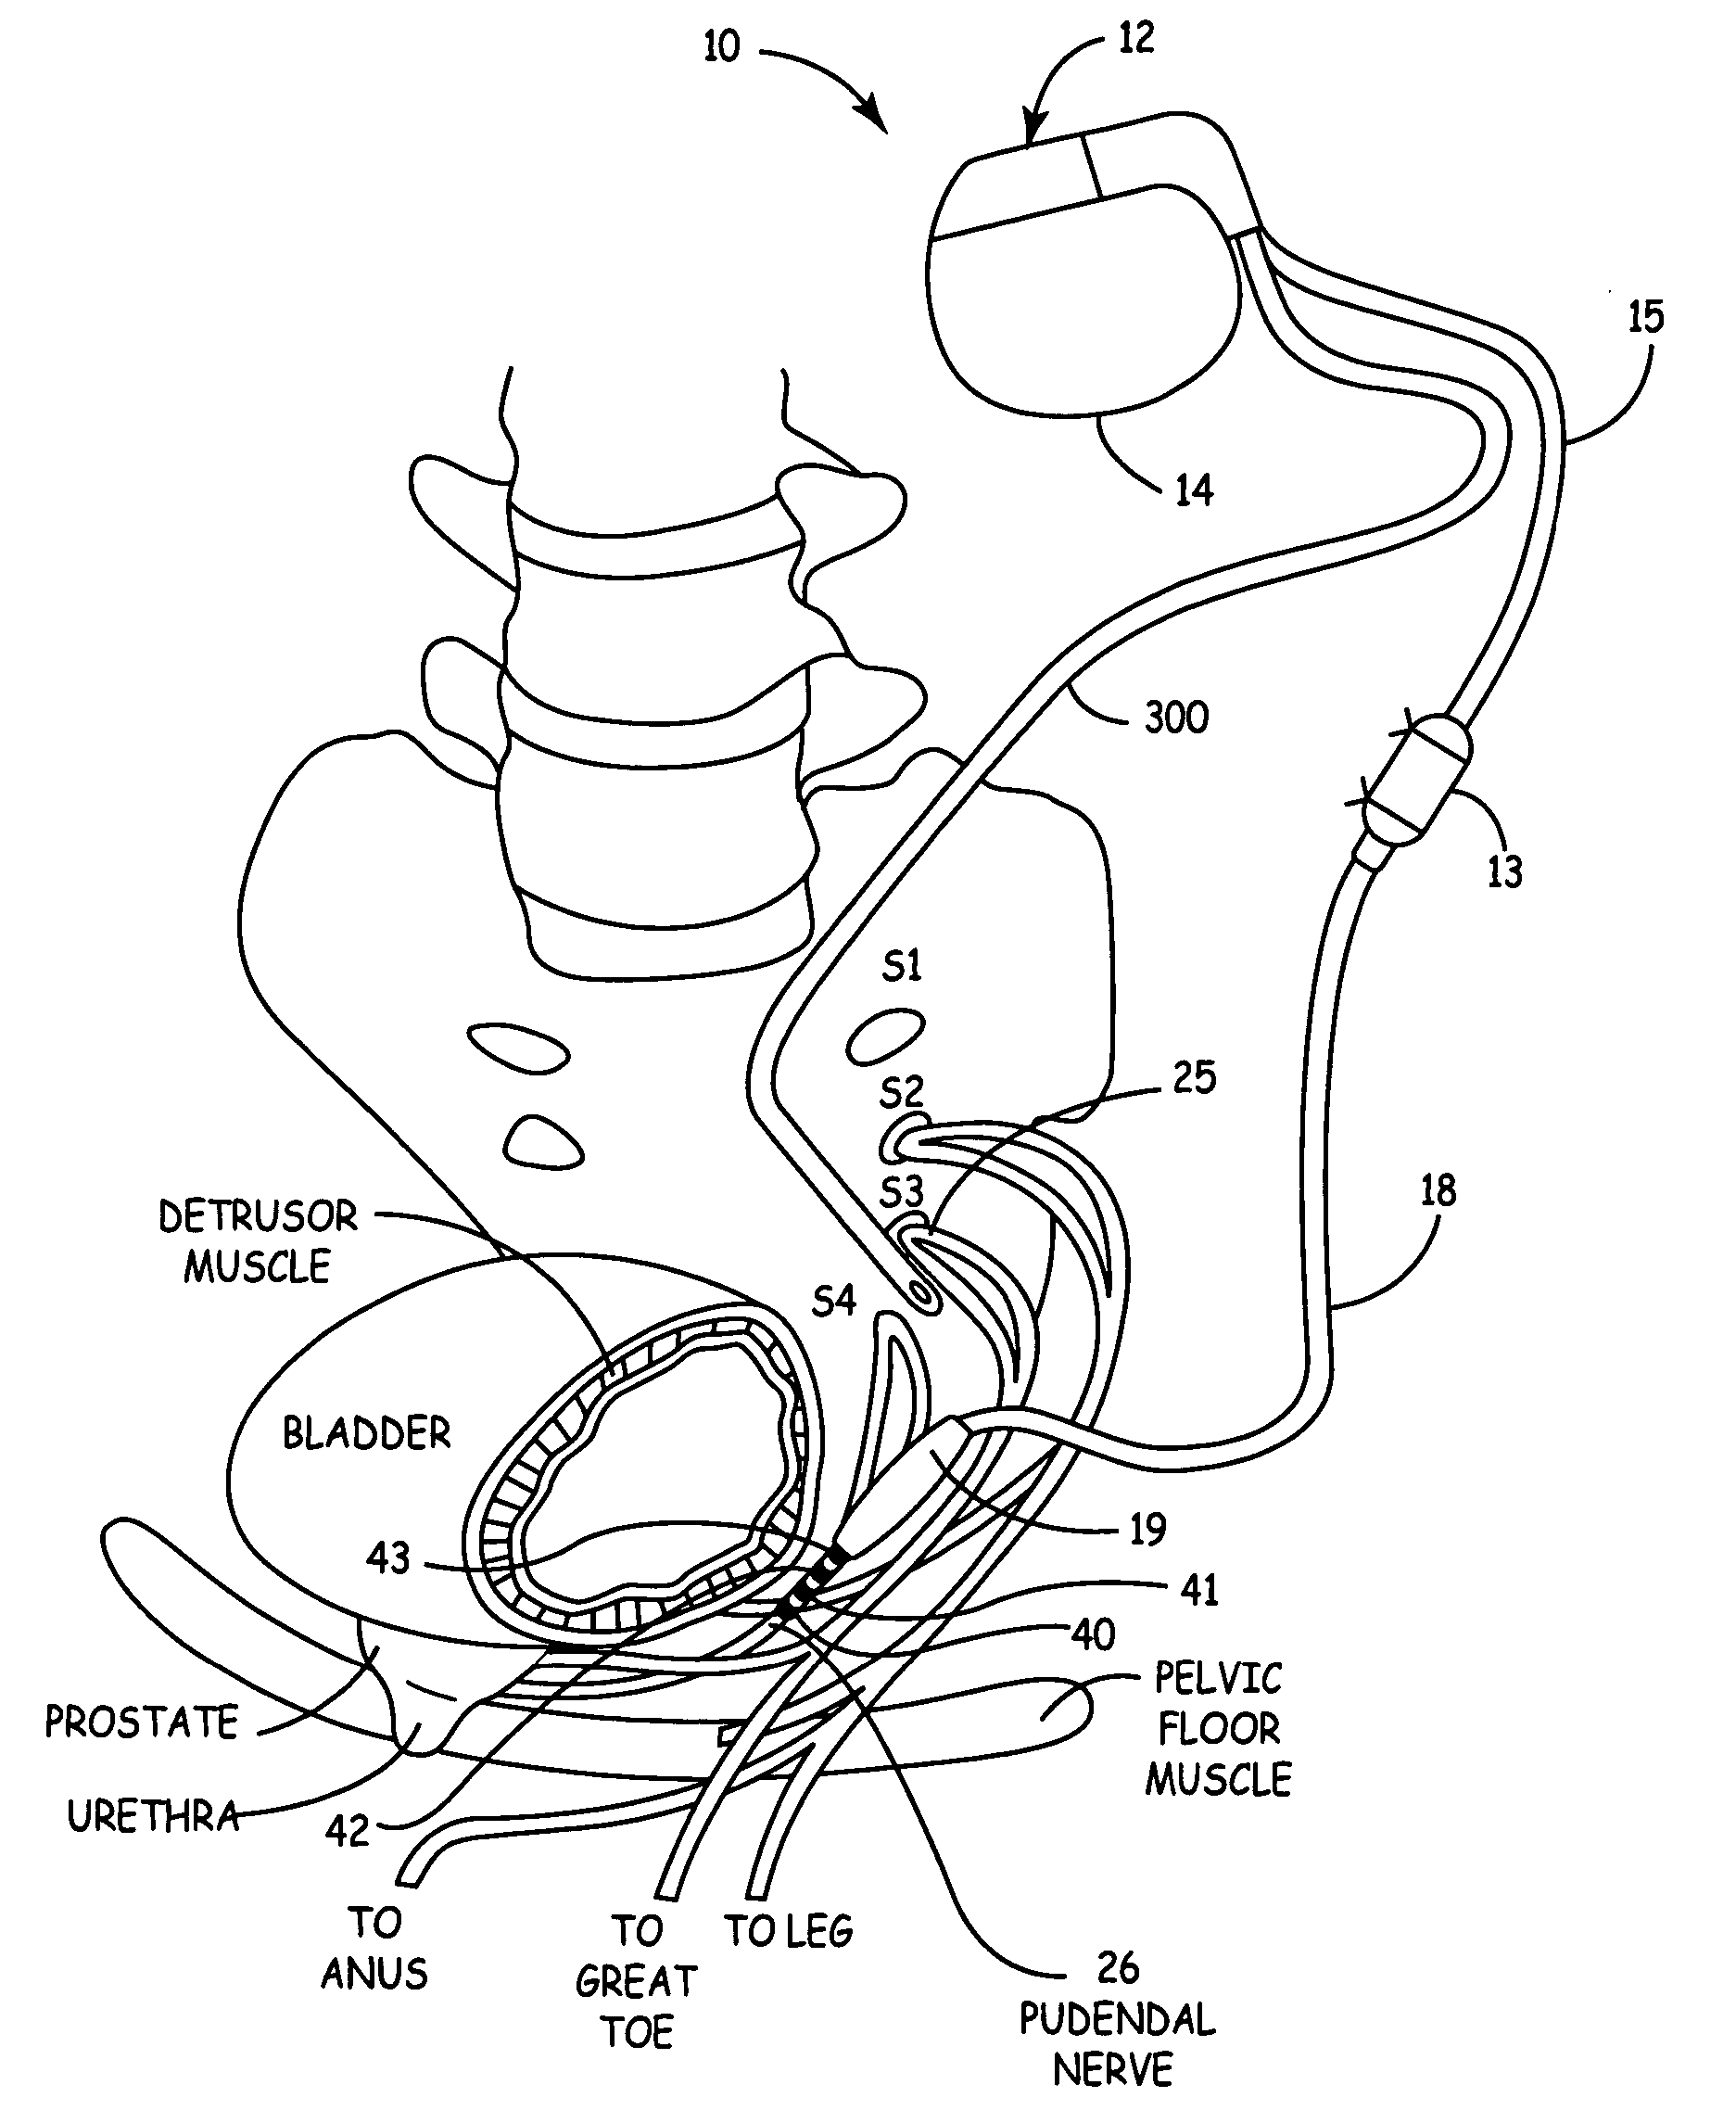 Method, system and device for treating disorders of the pelvic floor by electrical stimulation of and the delivery of drugs to the left and right pudendal nerves